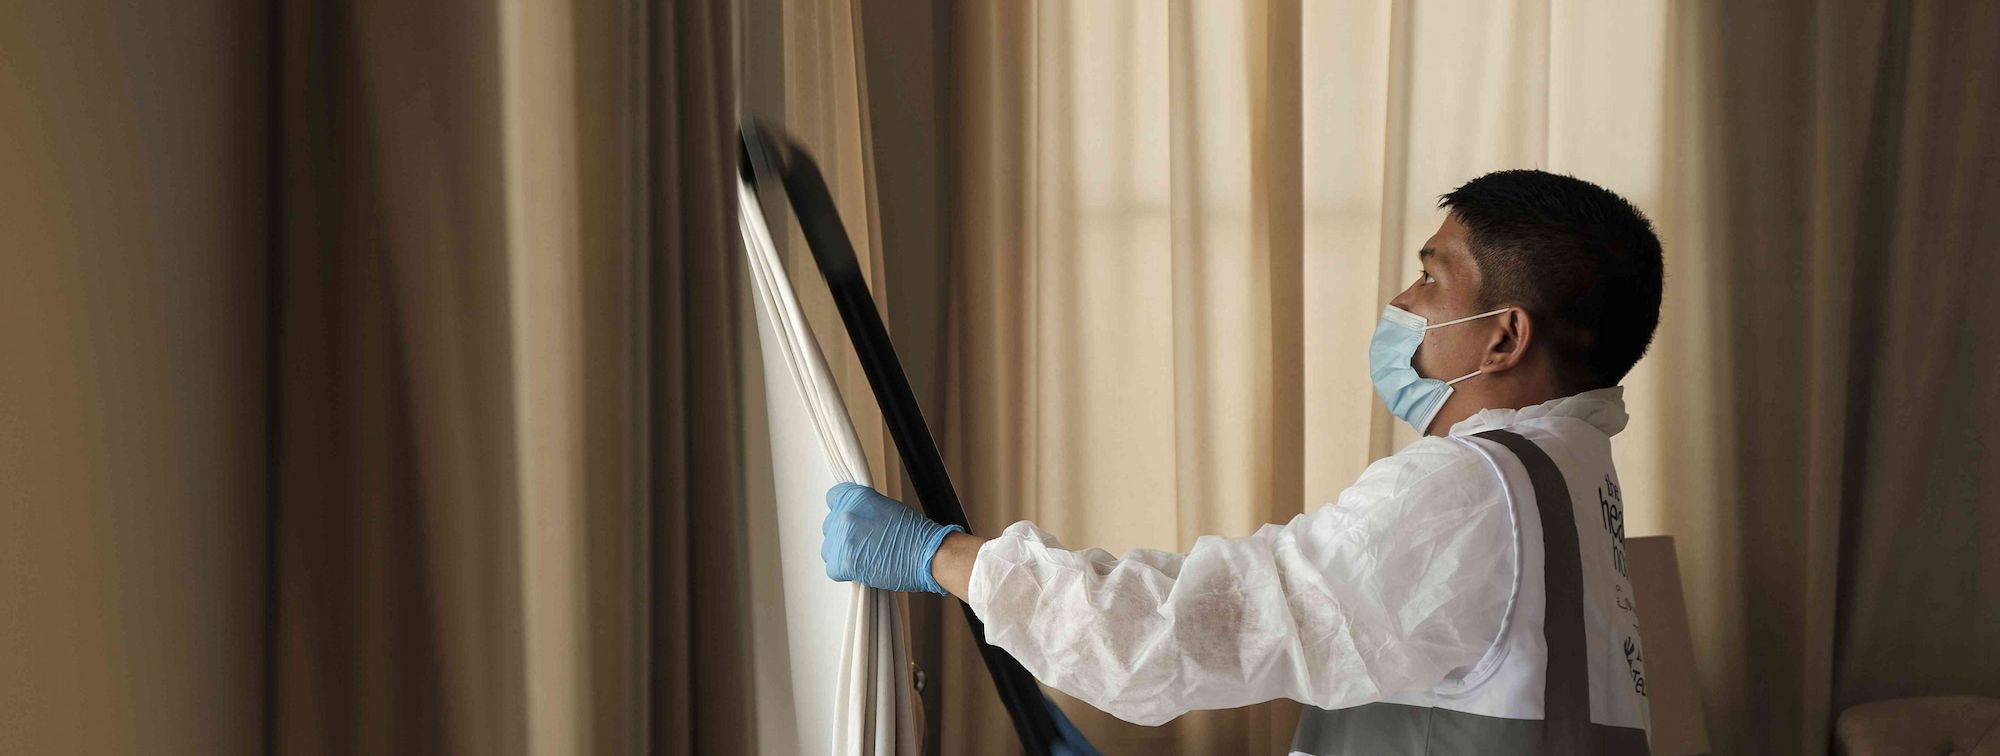 curtain cleaning dubai, blinds cleaning